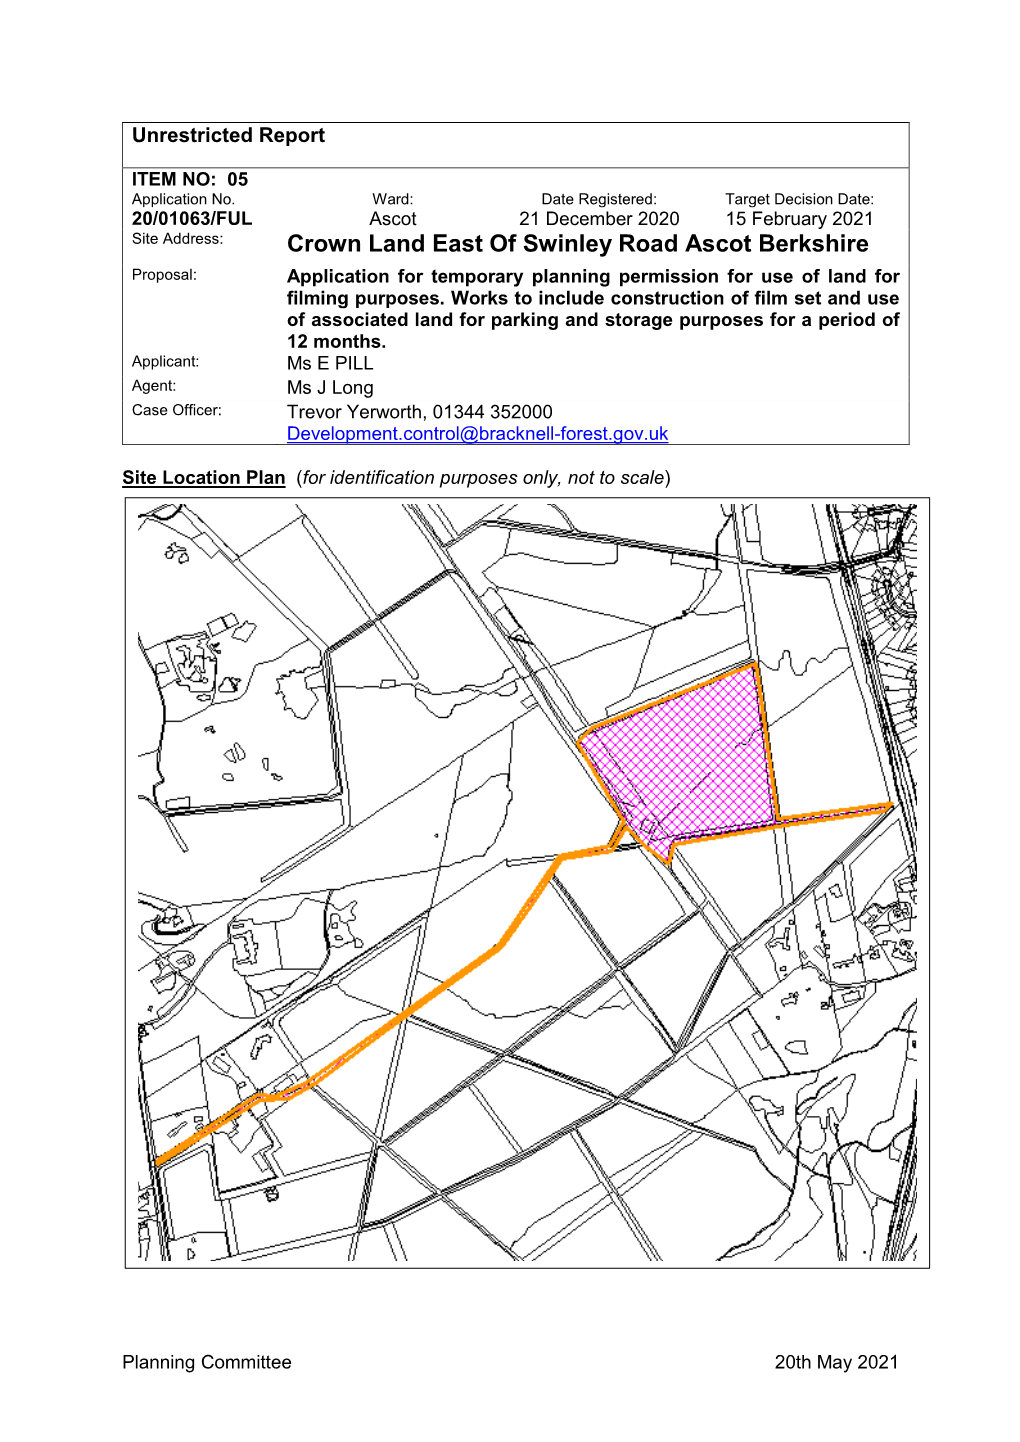 Crown Land East of Swinley Road Ascot Berkshire Proposal: Application for Temporary Planning Permission for Use of Land for Filming Purposes